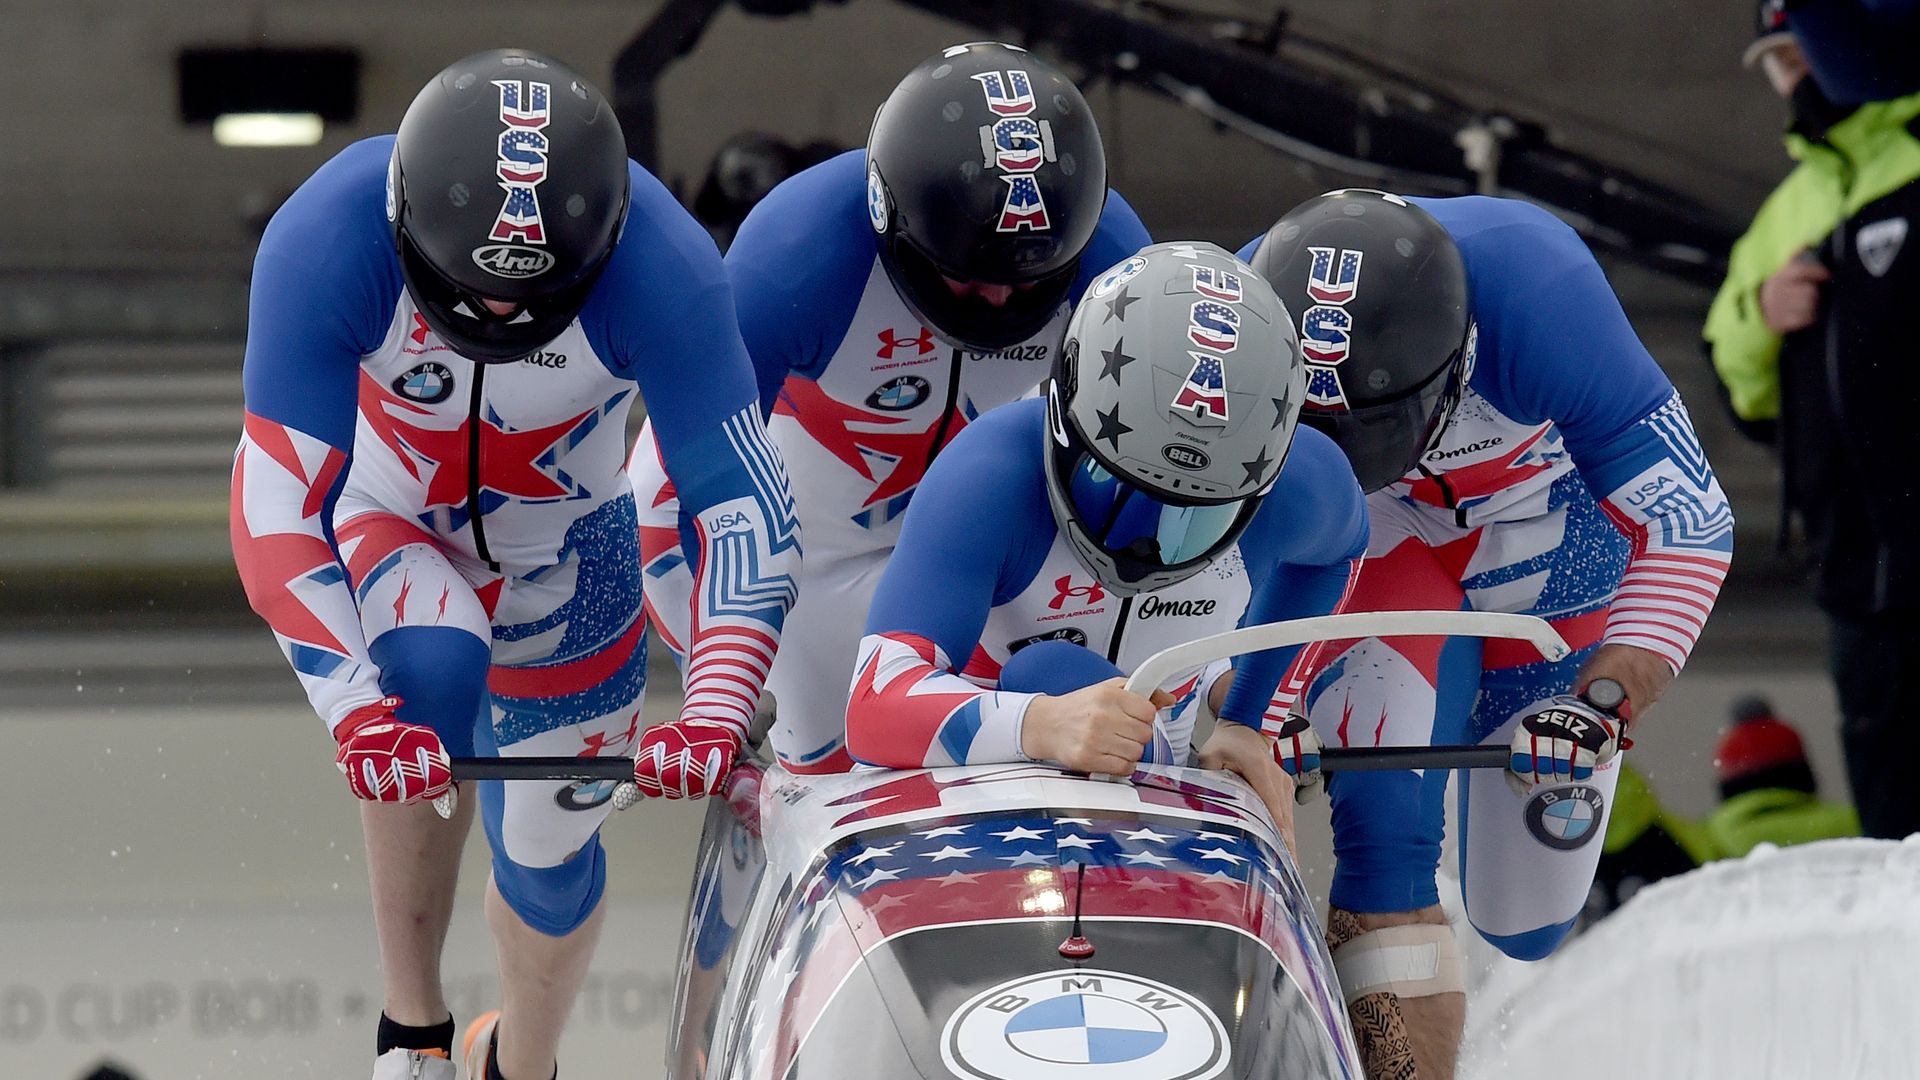 A photo of four people pushing a bobsled.